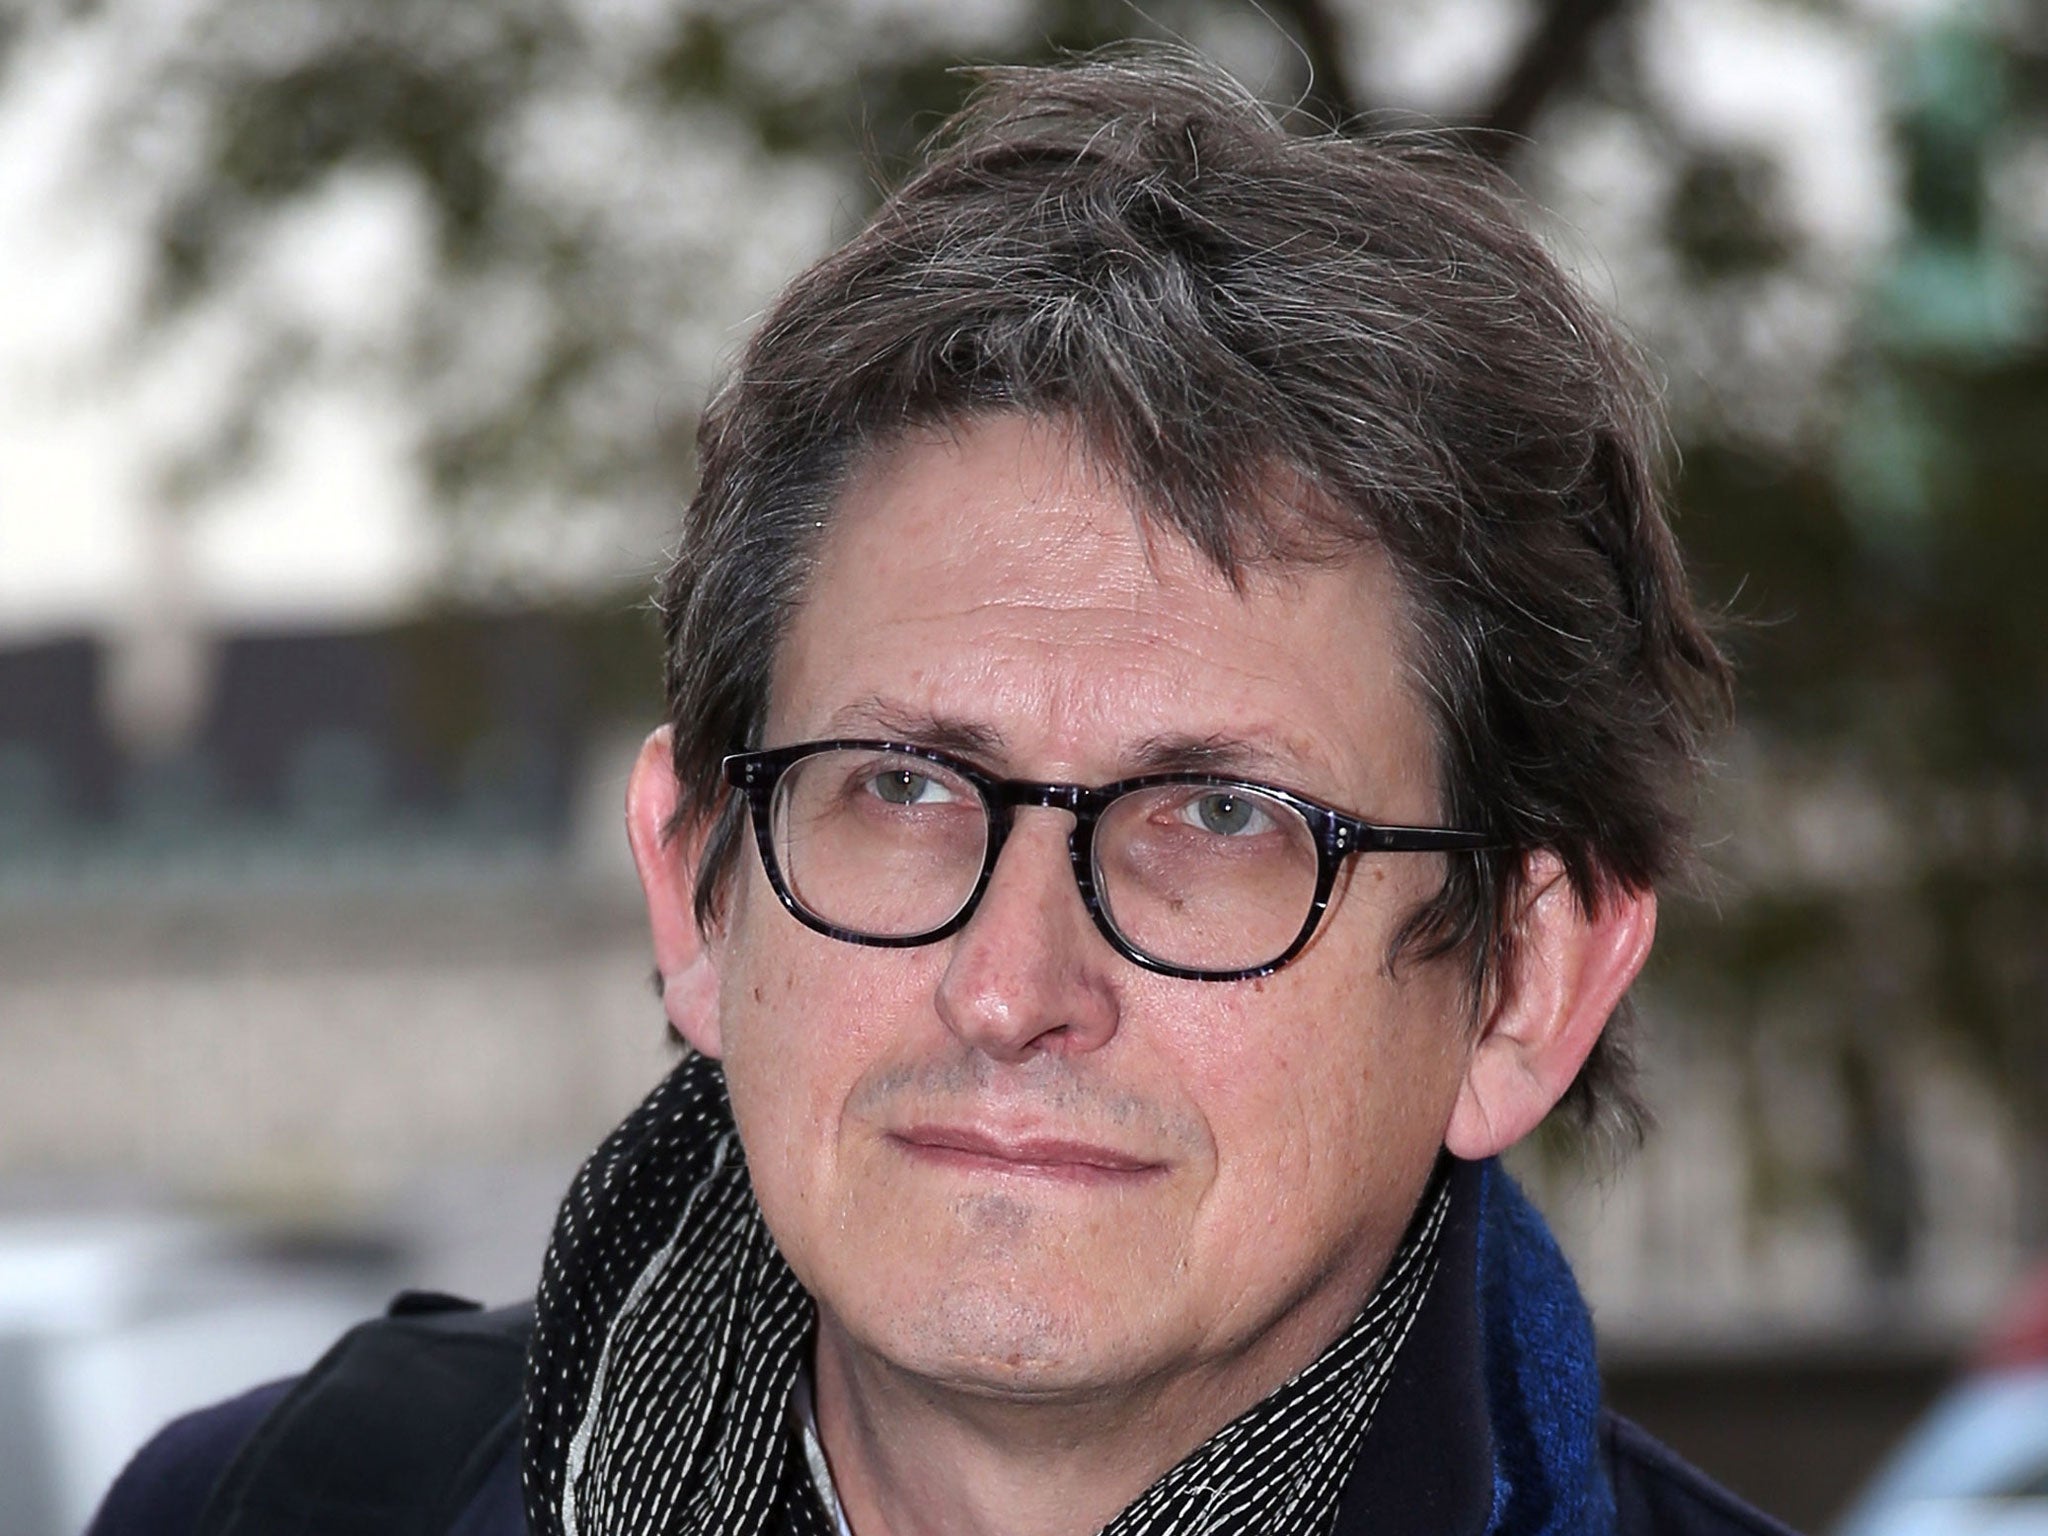 Alan Rusbridger faced opposition from his successor, Katherine Viner and Guardian Media Group chief executives